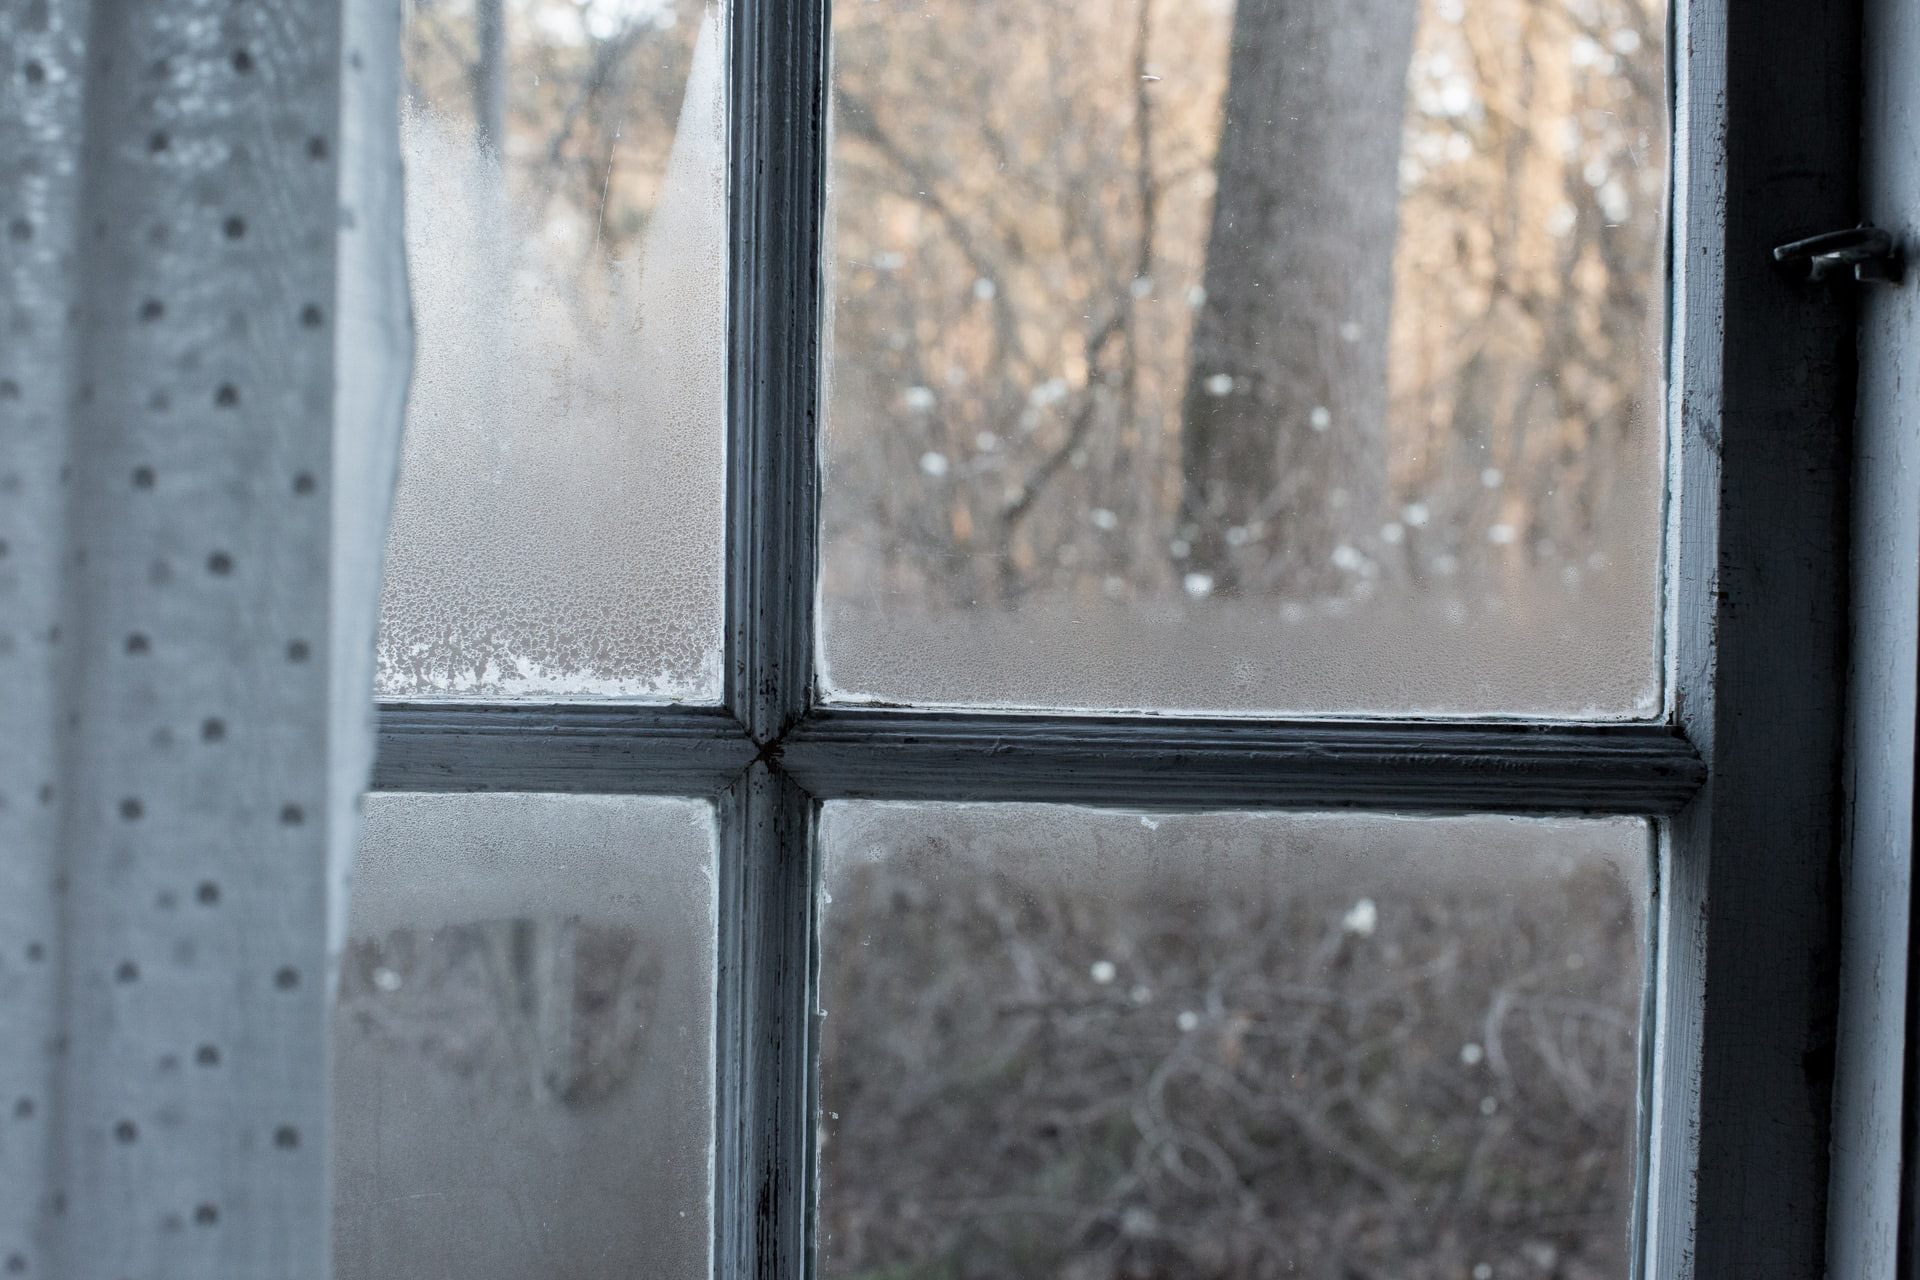 How to Absorb and Stop Condensation on Windows Overnight